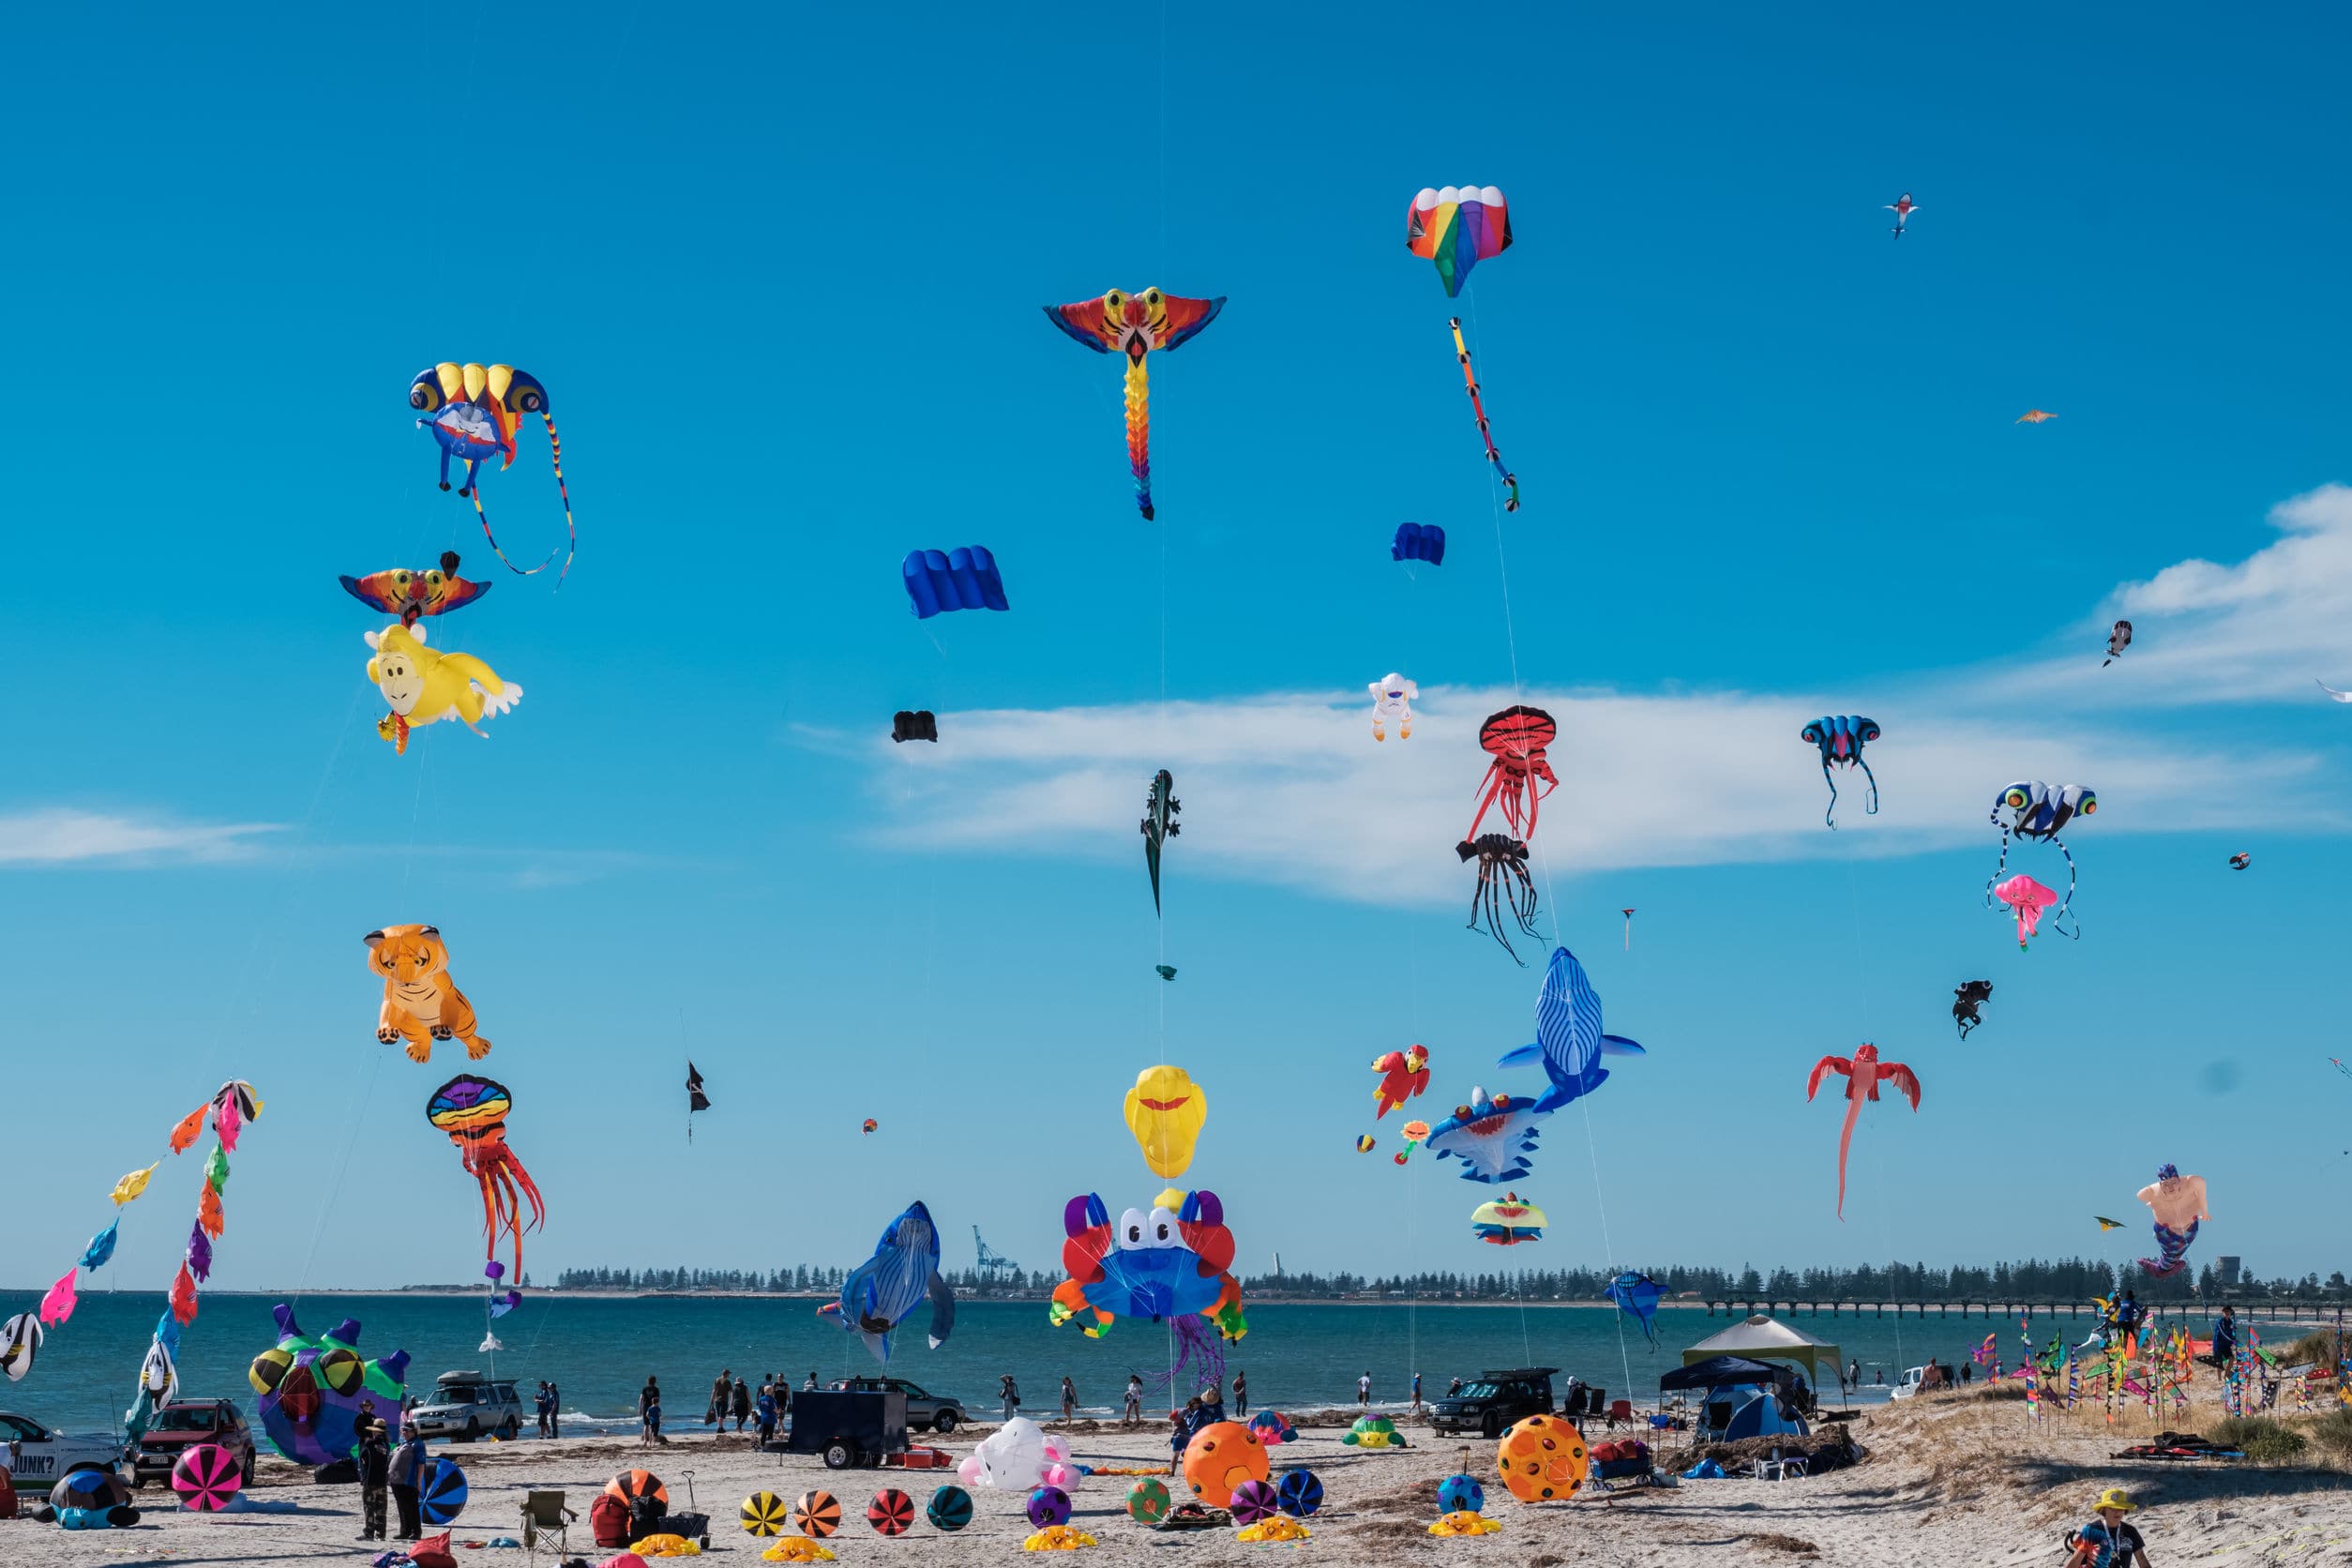 Adelaide, Australia - March 31, 2018: Adelaide International Kite Festival at Semaphore Beach viewed from jetty. Event gathered together kite flyers from Australia, New Zealand, USA and Japan